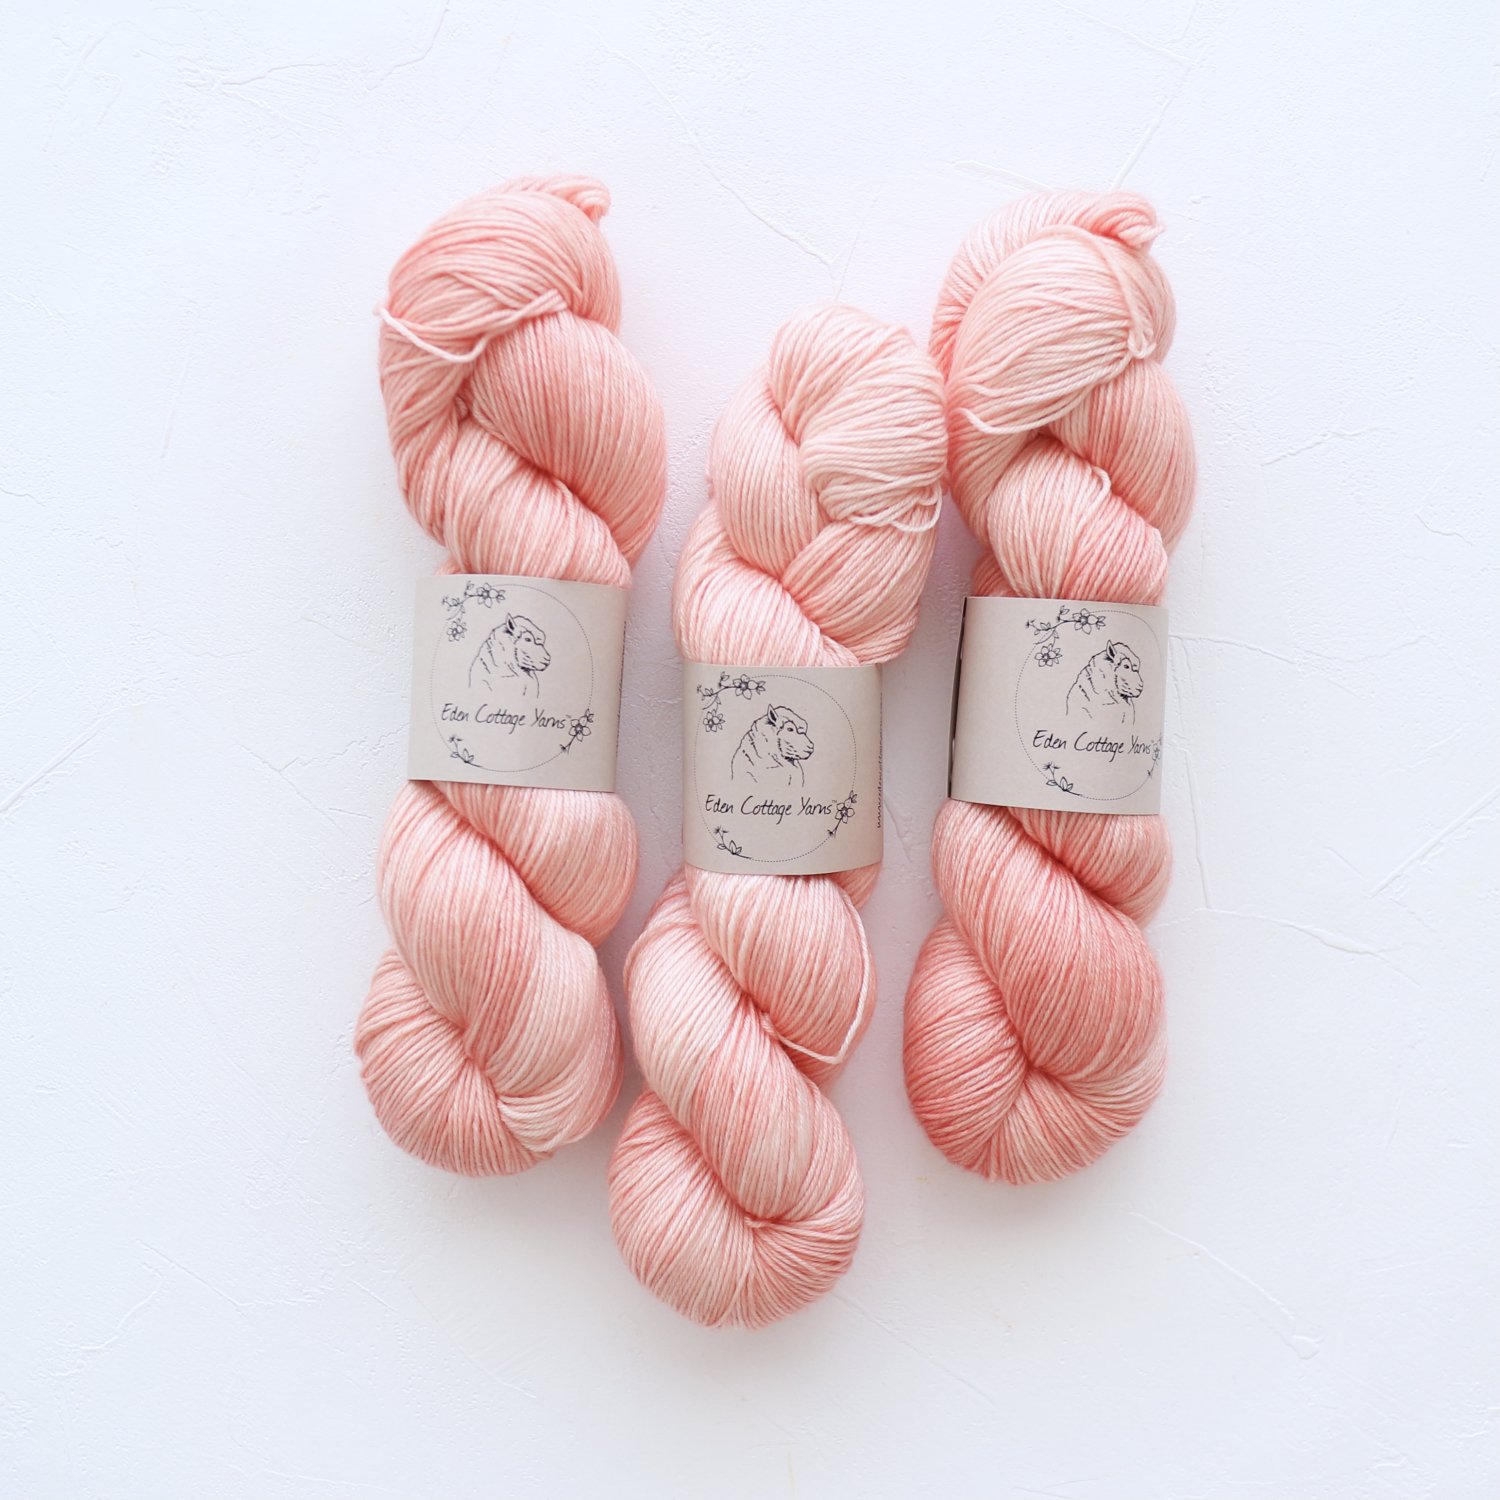 【Eden Cottage Yarns】<br>Pendle 4ply<br>Apricot Tulip